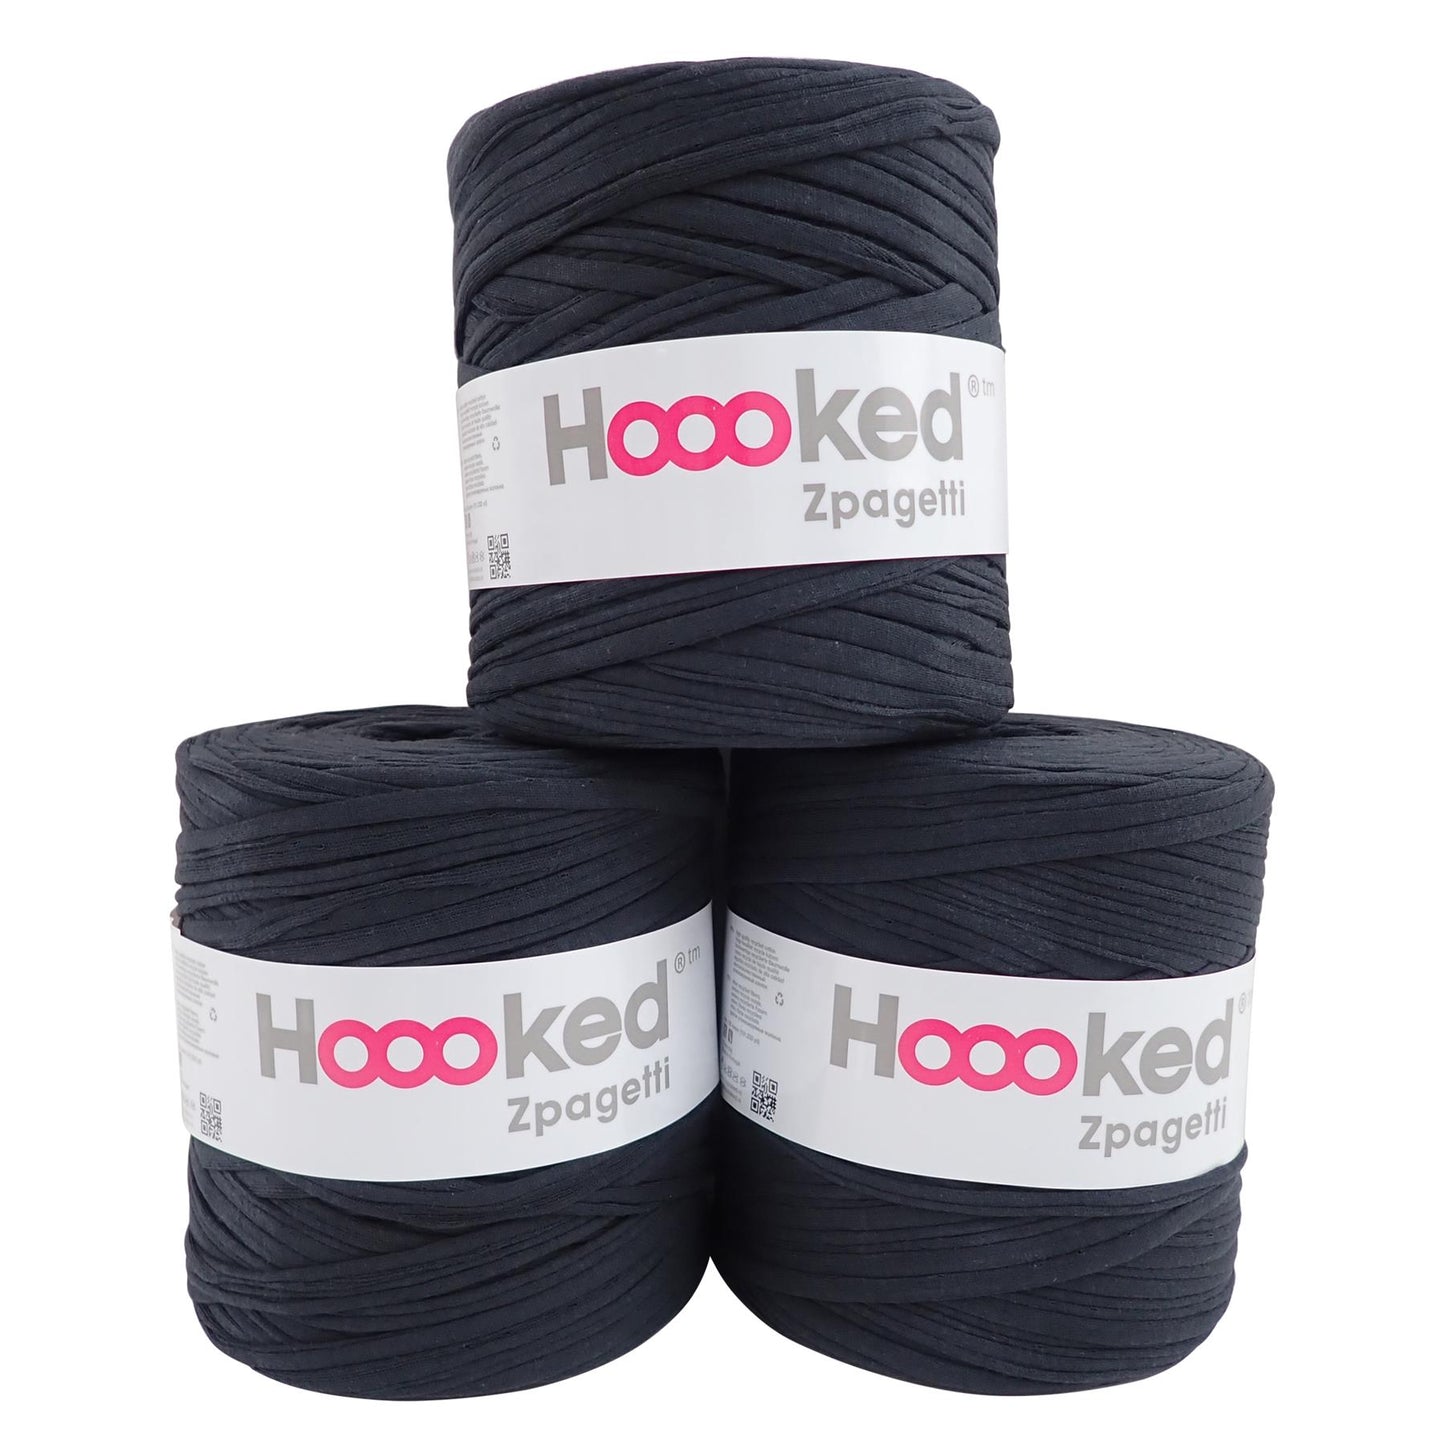 [Hoooked] Zpagetti Charcoal Grey Cotton T-Shirt Yarn - 120M, 700g Pack of 3